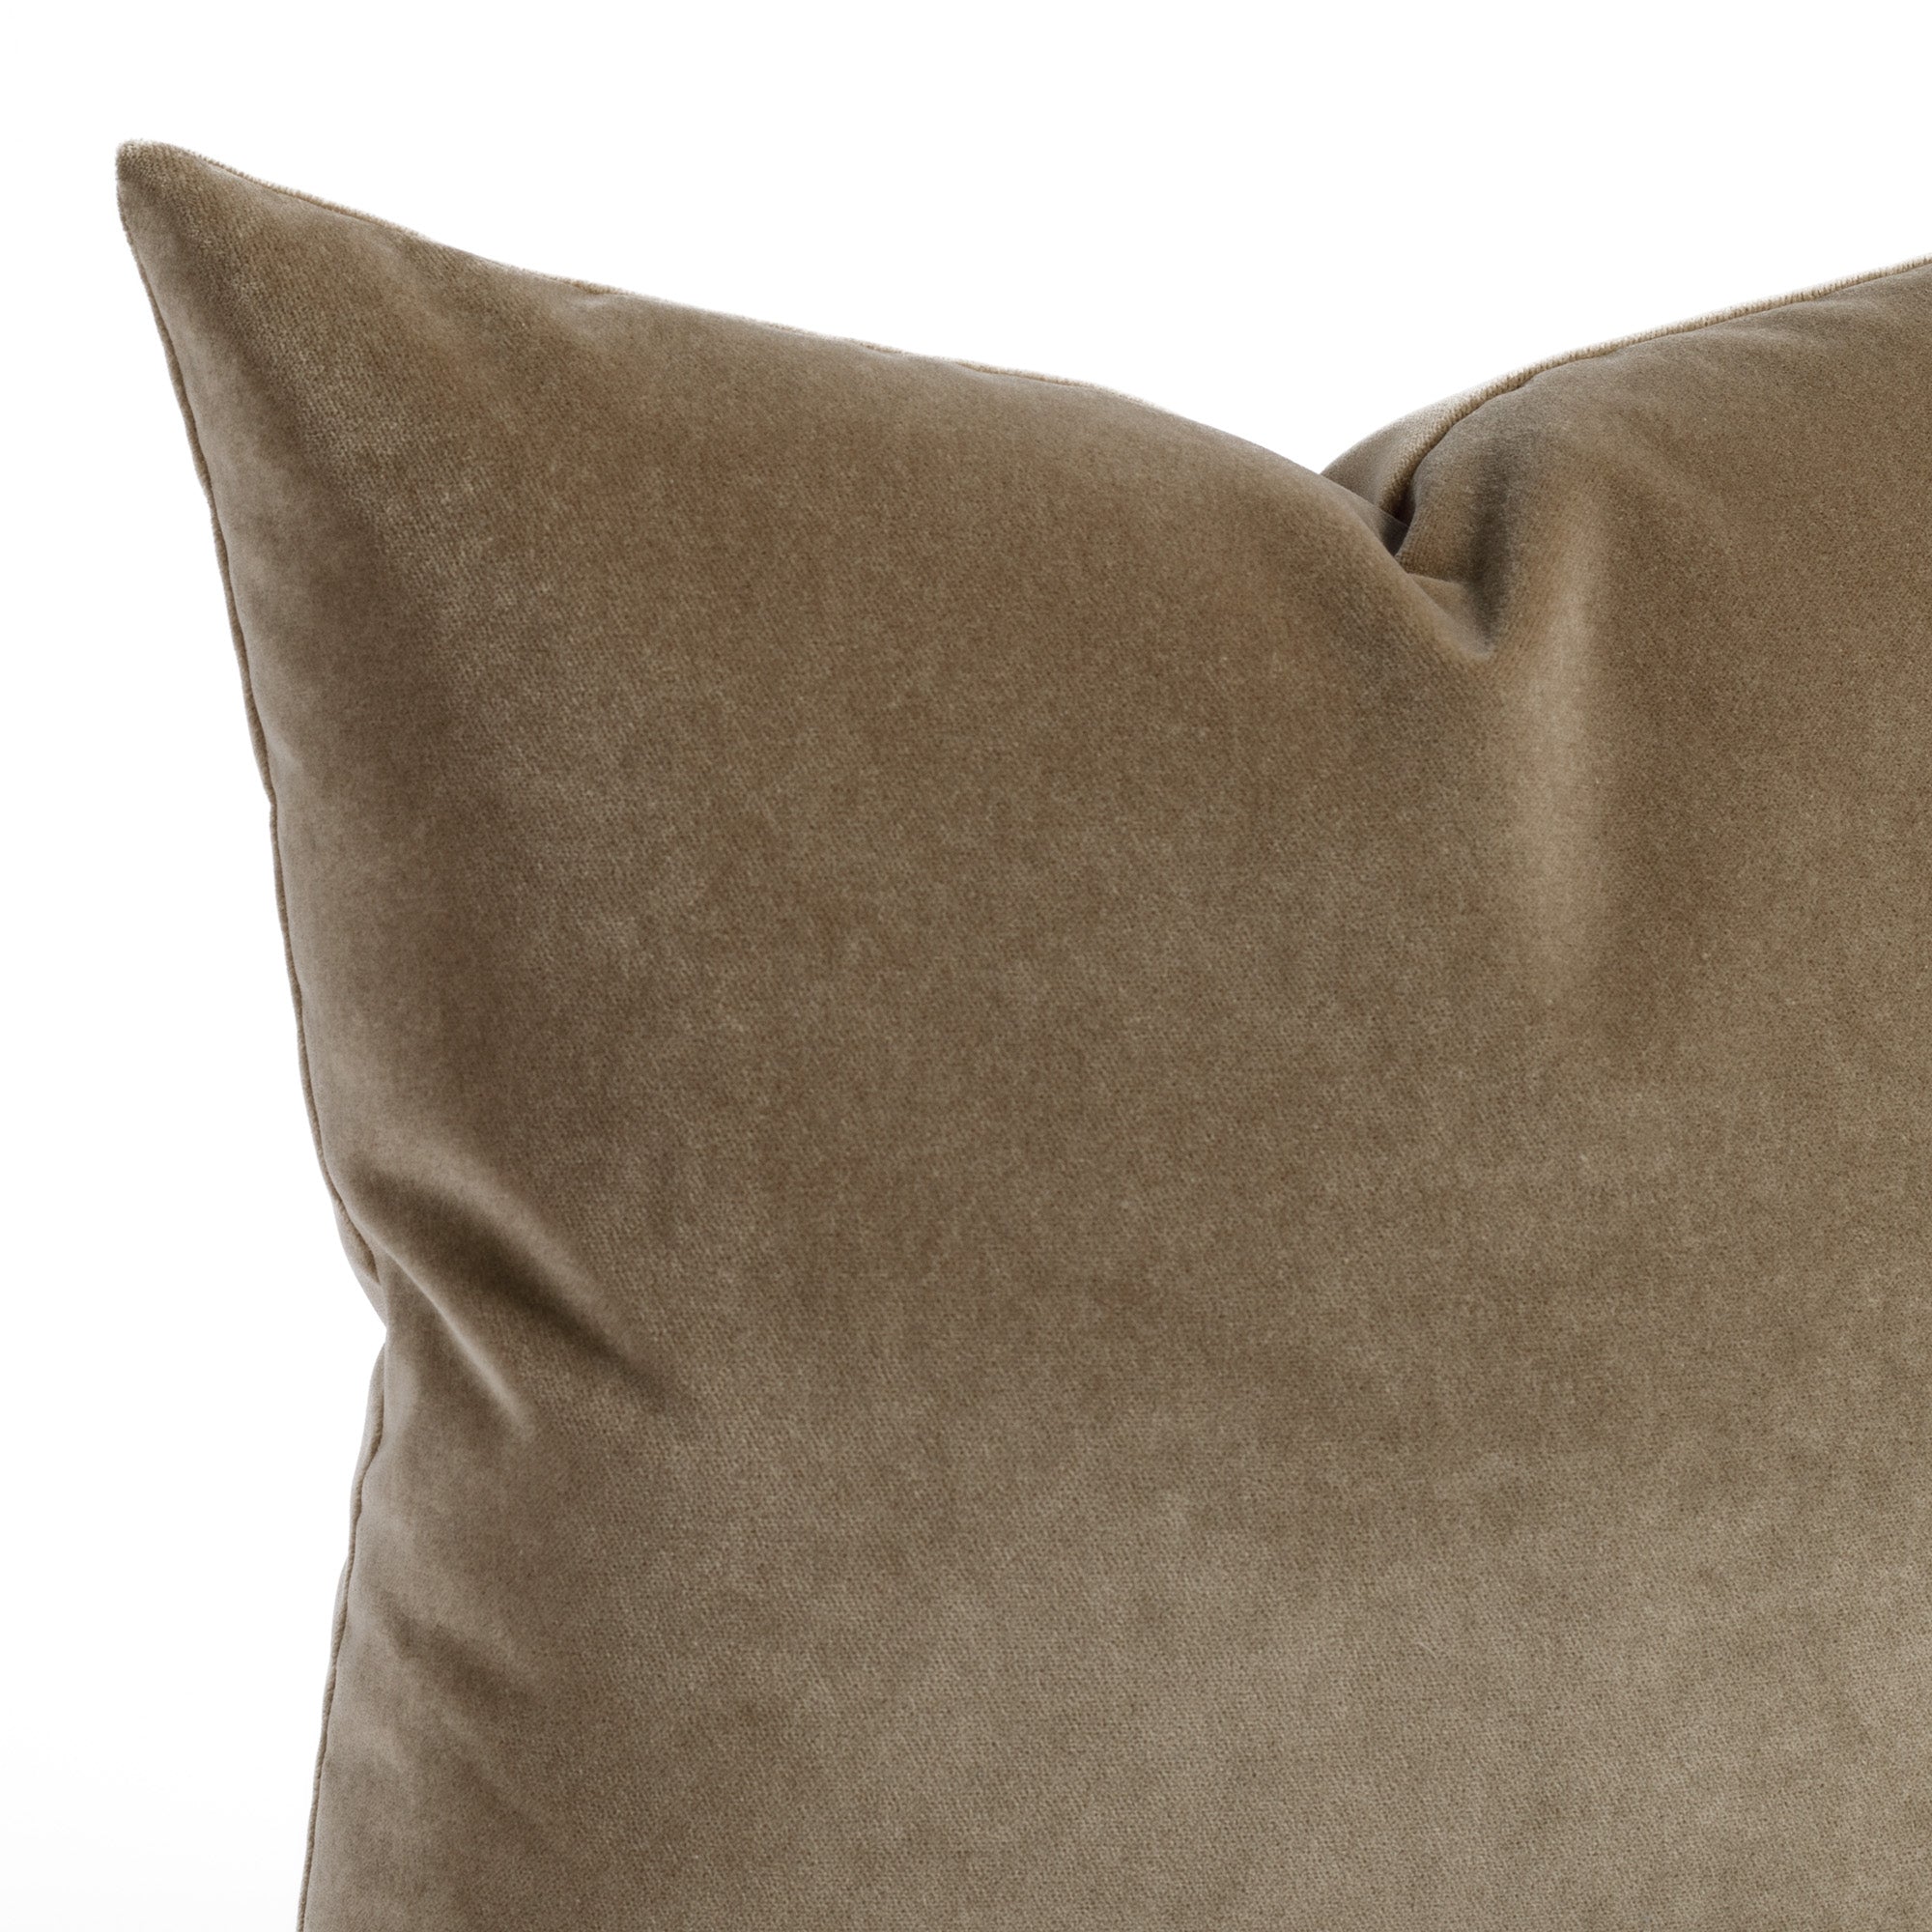 an earthy brown pillow : close up view